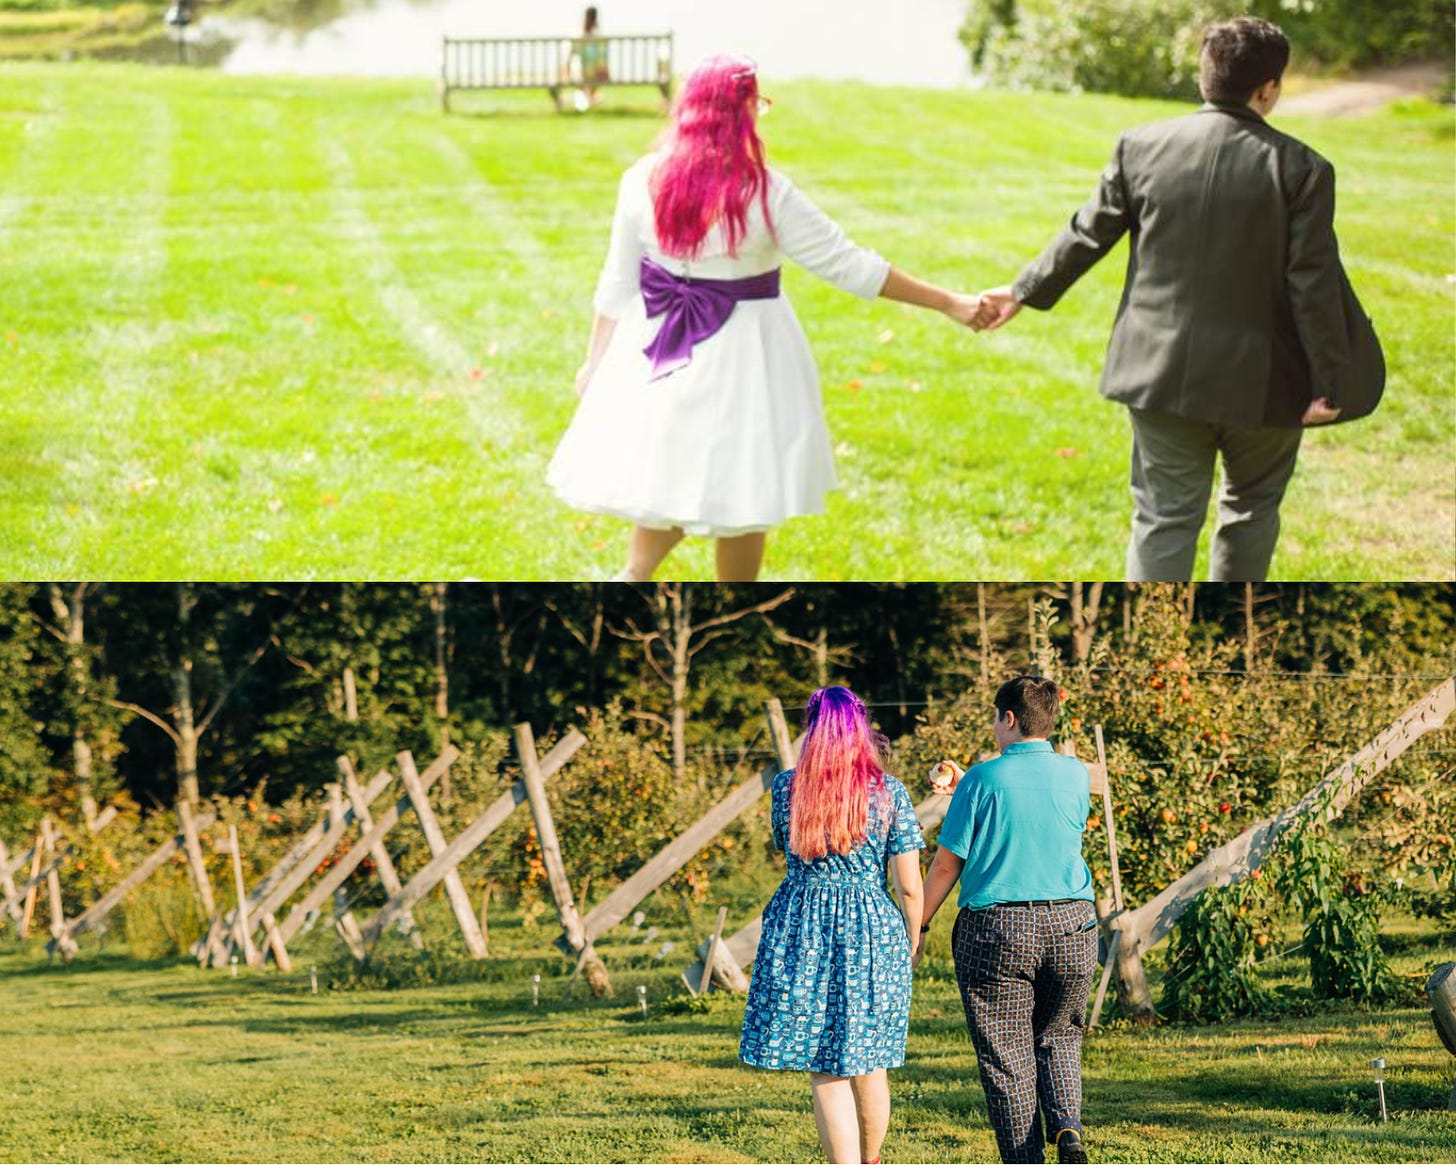 Two photos of the same couple walking, taken from behind. In the top photo they wear wedding clothes and walk downhill toward a pond. In the second they walk closer together in blue outfits through a small apple orchard.